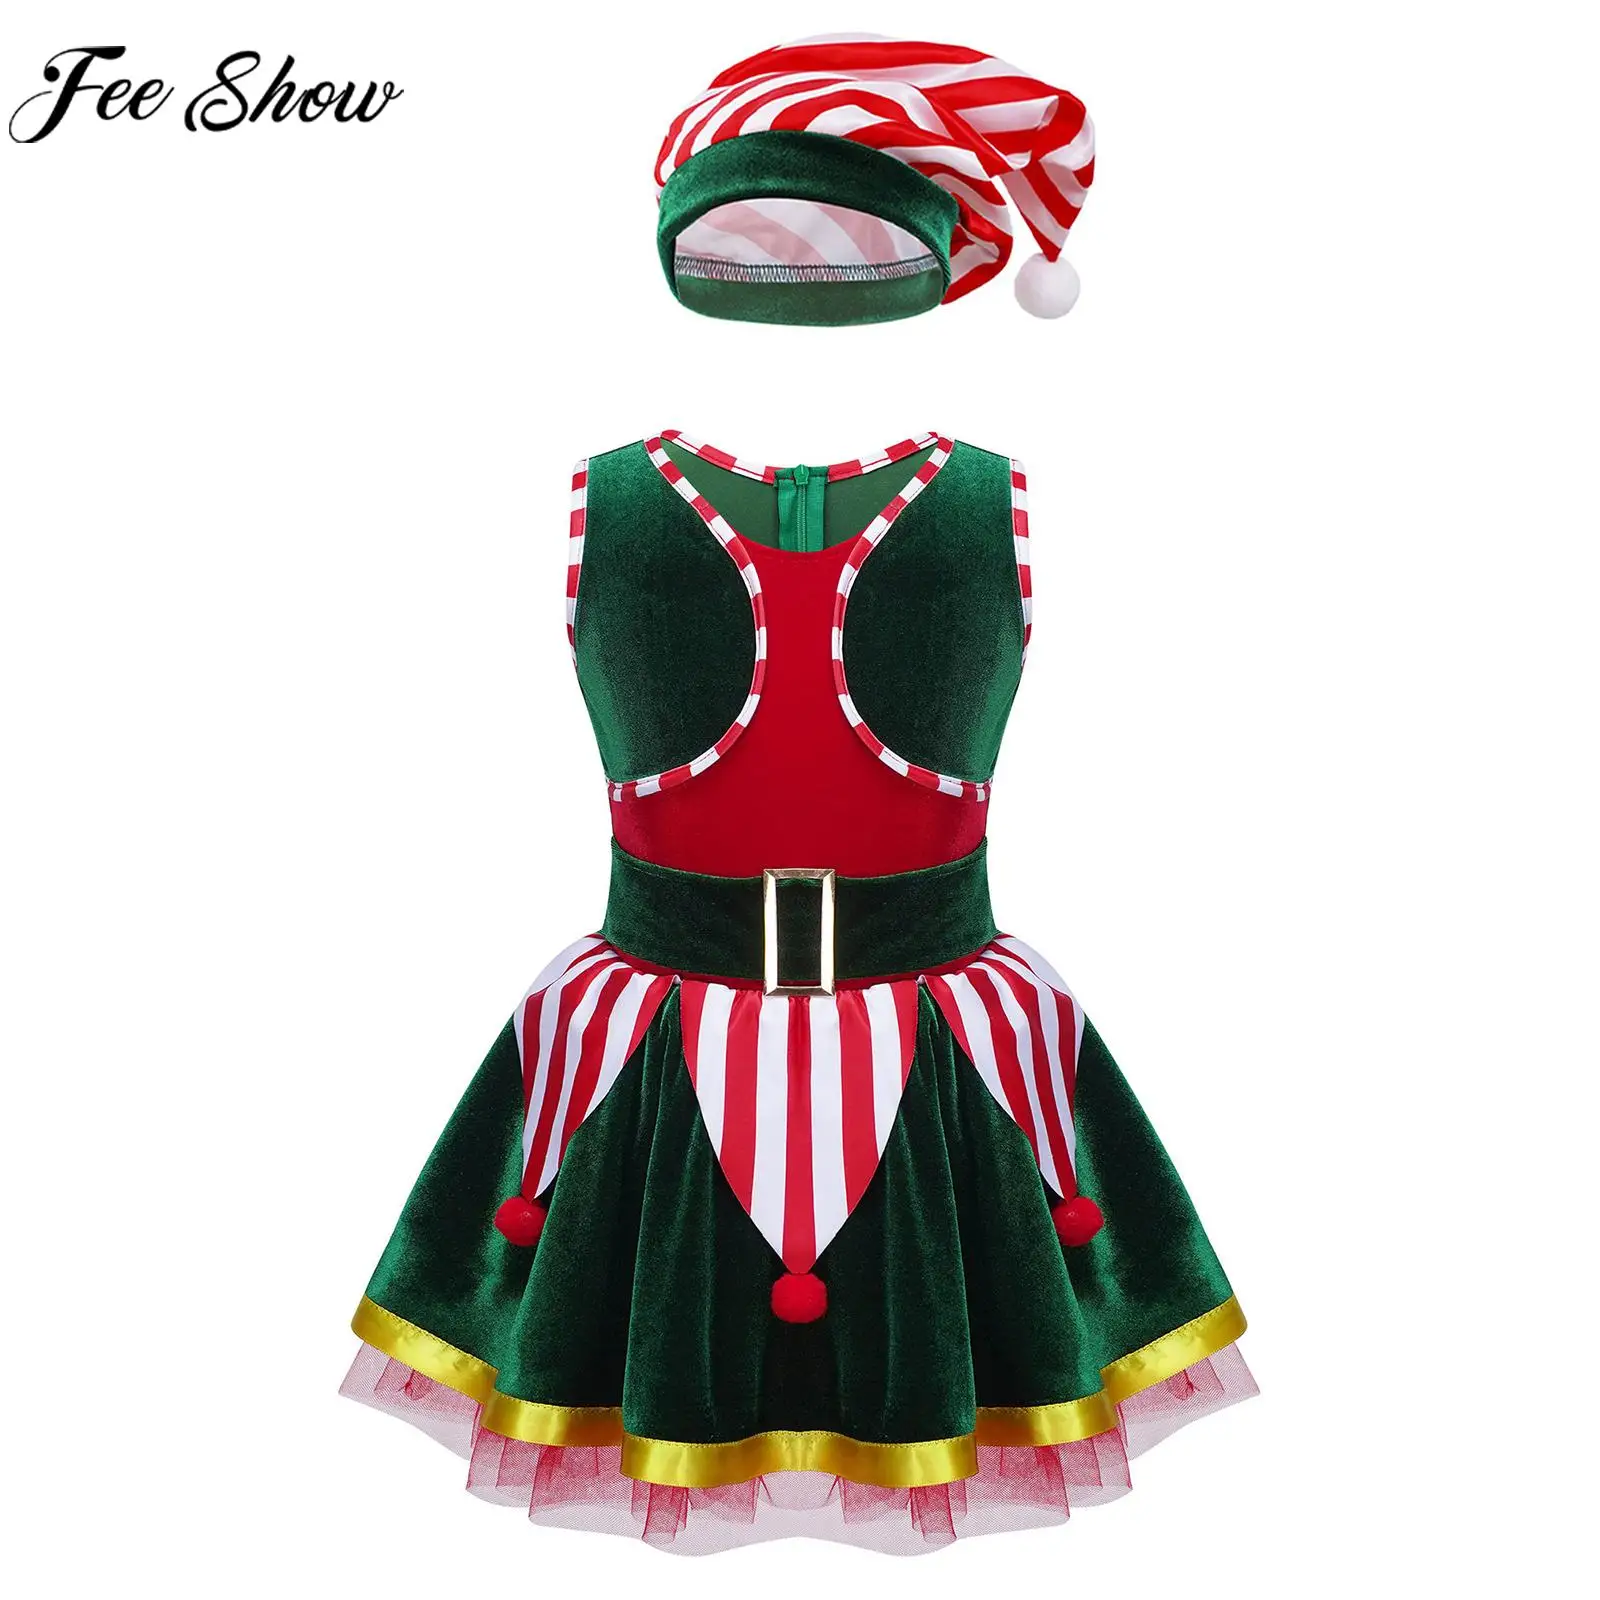 

Kids Girls Christmas Elf Cosplay Dress Xmas New Year Theme Party Roleplay Outfit Sleeveless Pompom Tutu Dress with Striped Hat